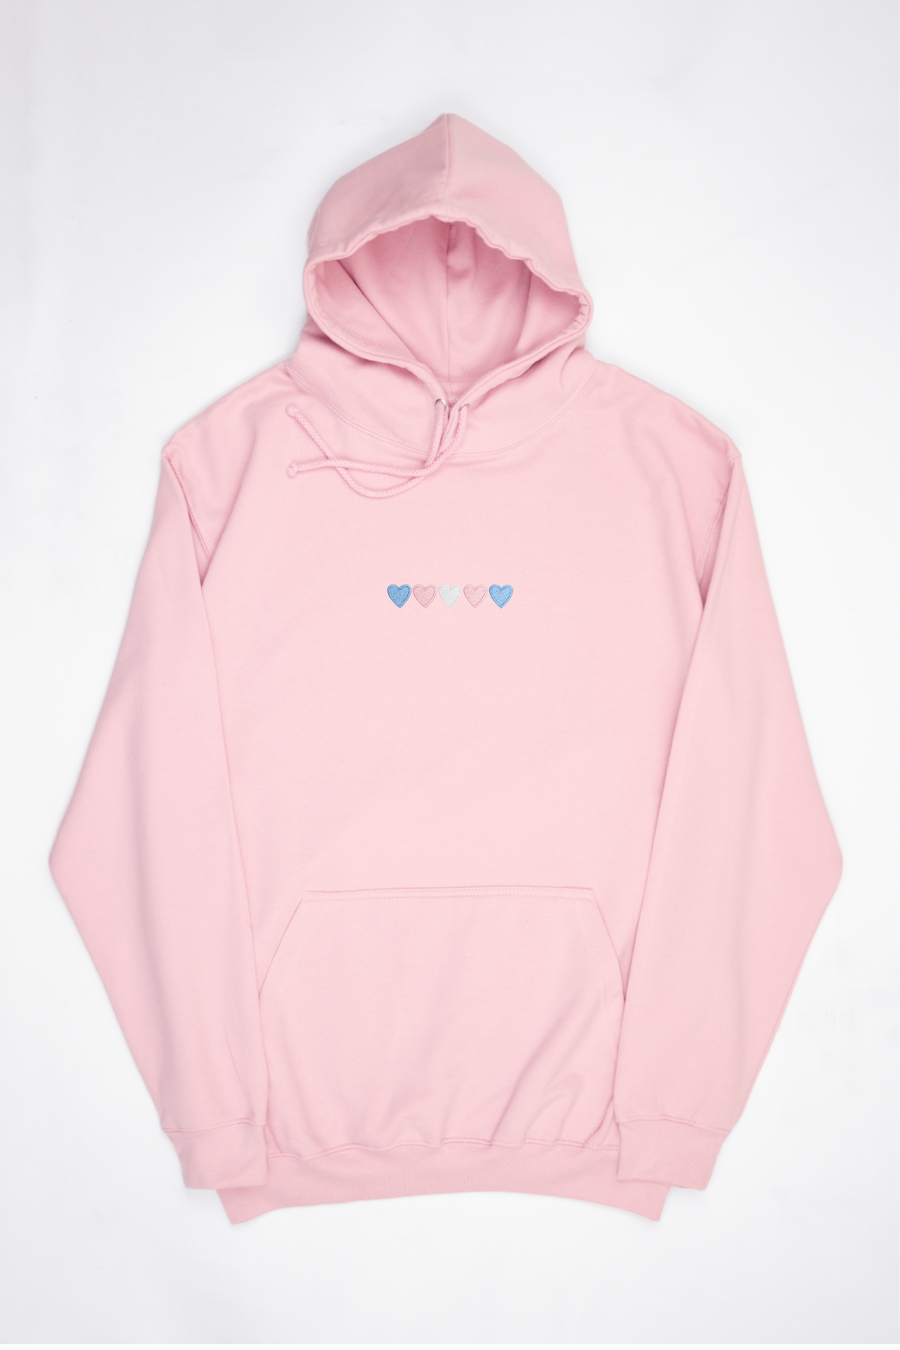 Embroidered Hearts Transgender Hoodie